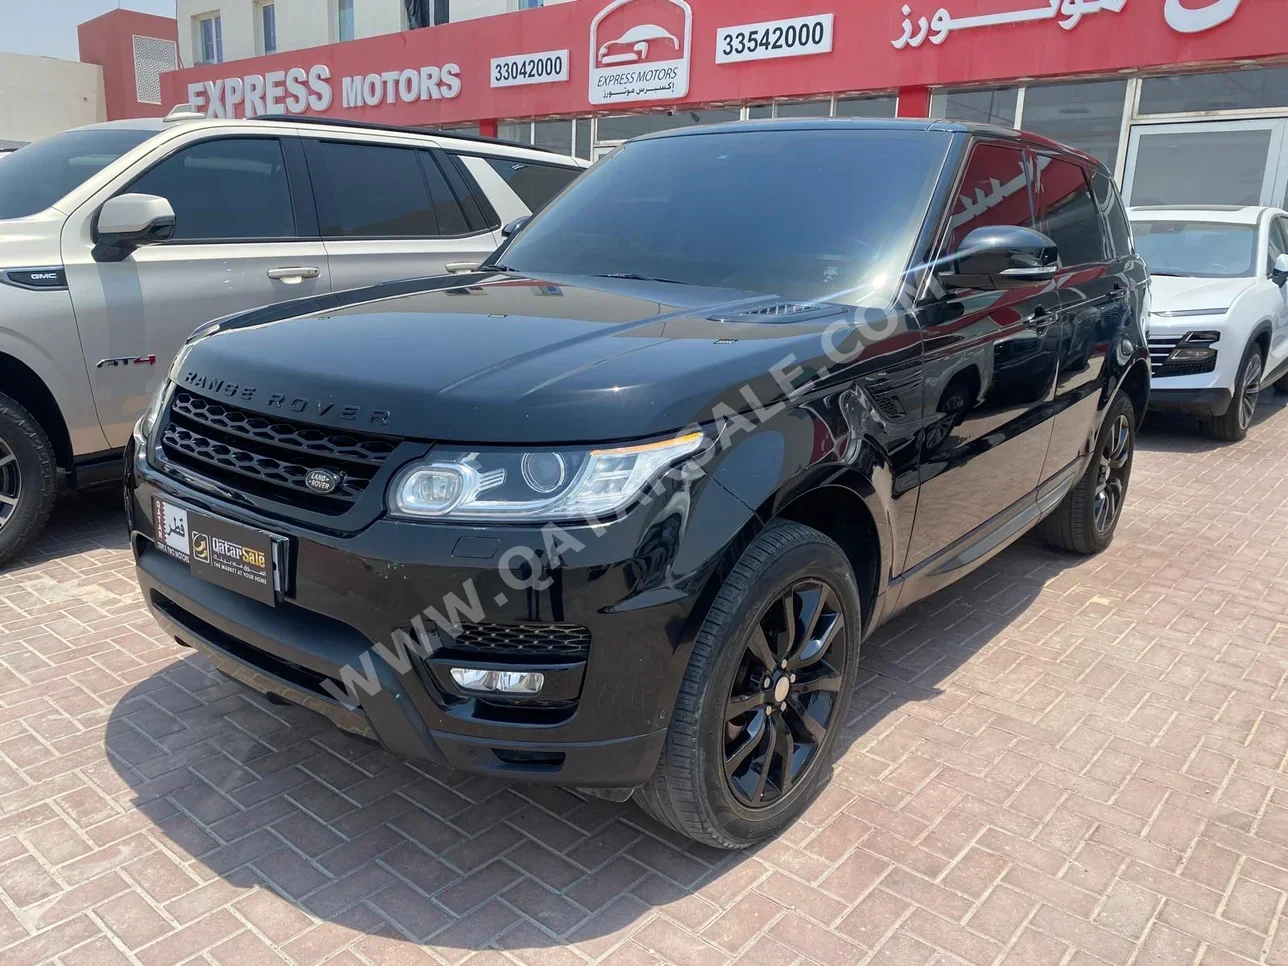 Land Rover  Range Rover  Sport  2014  Automatic  245,000 Km  8 Cylinder  Four Wheel Drive (4WD)  SUV  Black